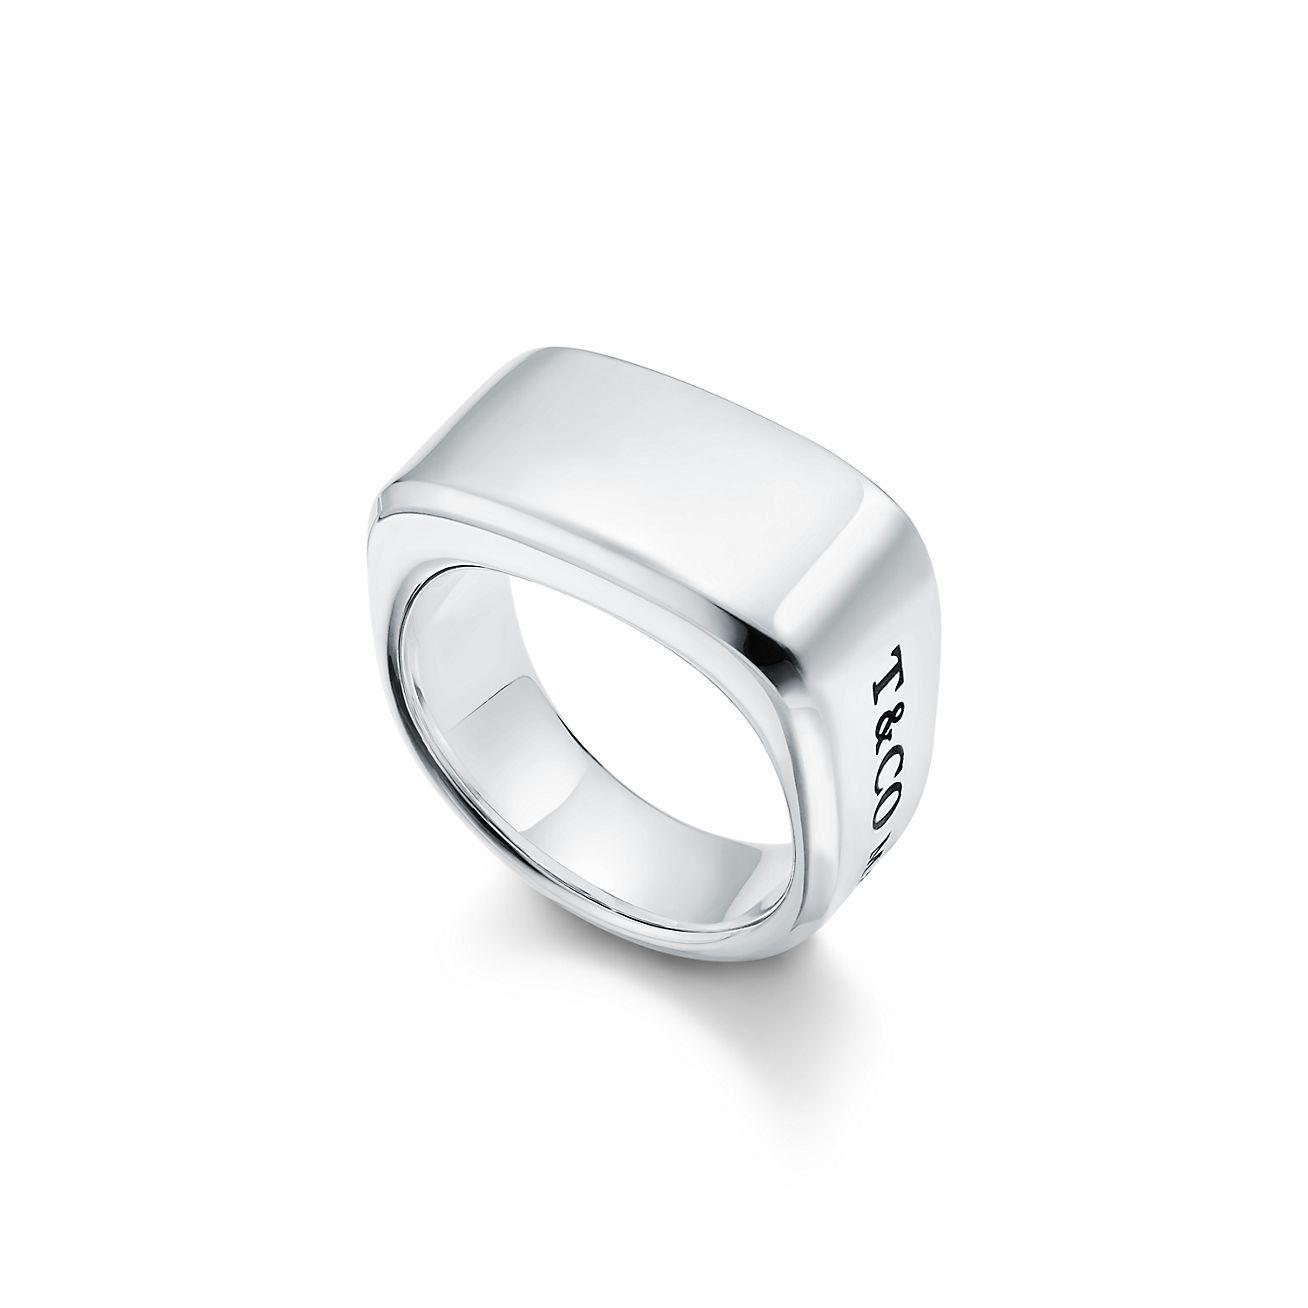 Tiffany 1837™ Makers signet ring in 